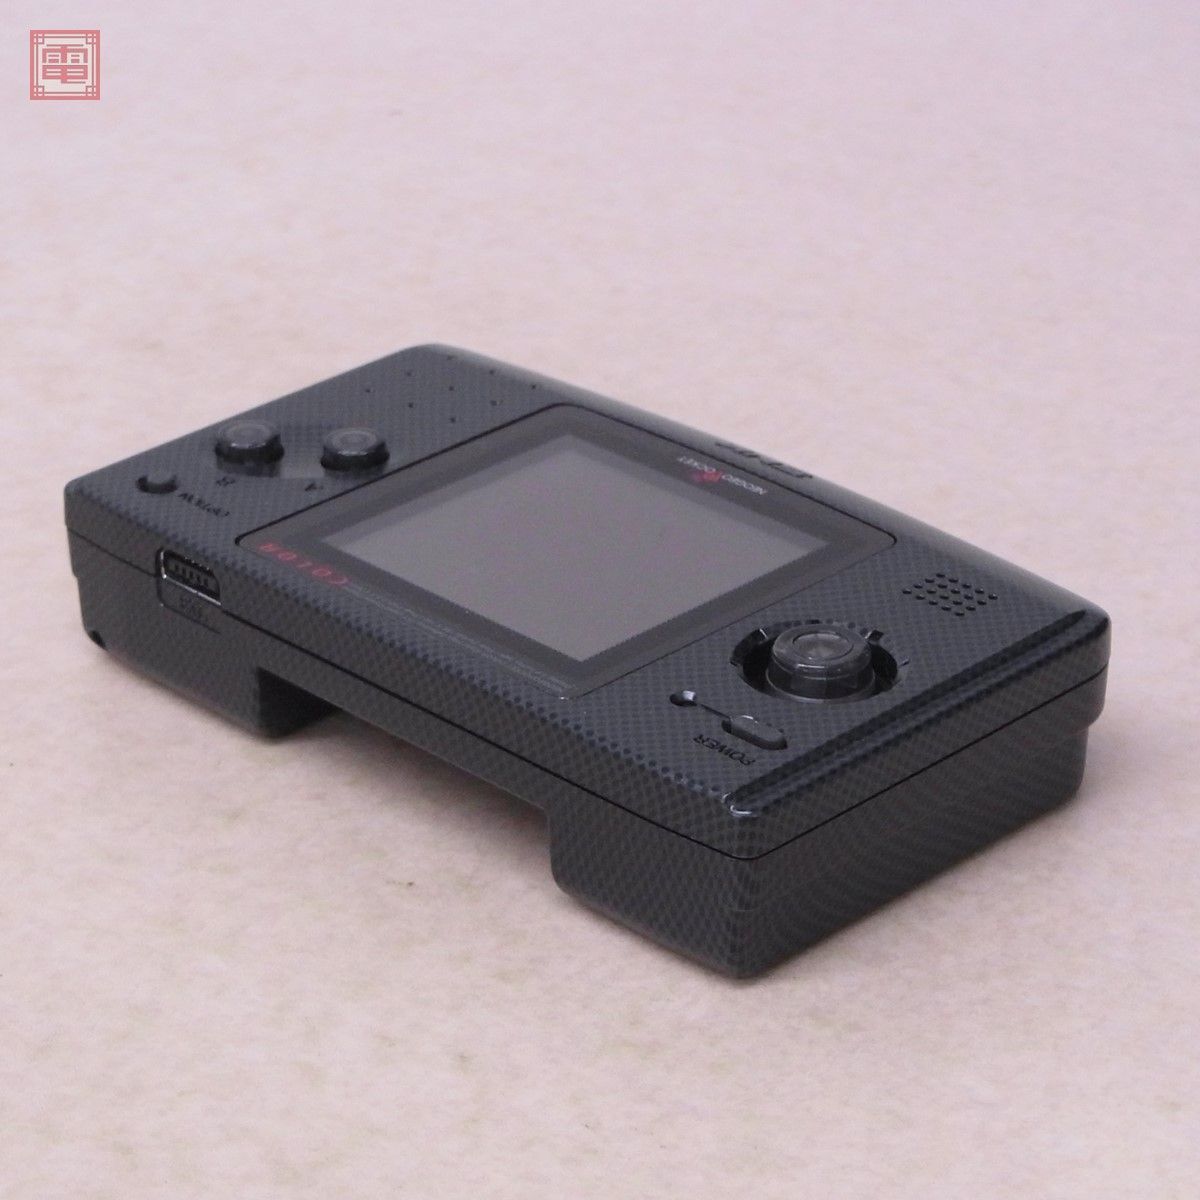  operation goods serial coincidence NGP Neo geo pocket color body NEOP52010 carbon black NEO GEOes*en* Kei SNK box opinion attaching [10